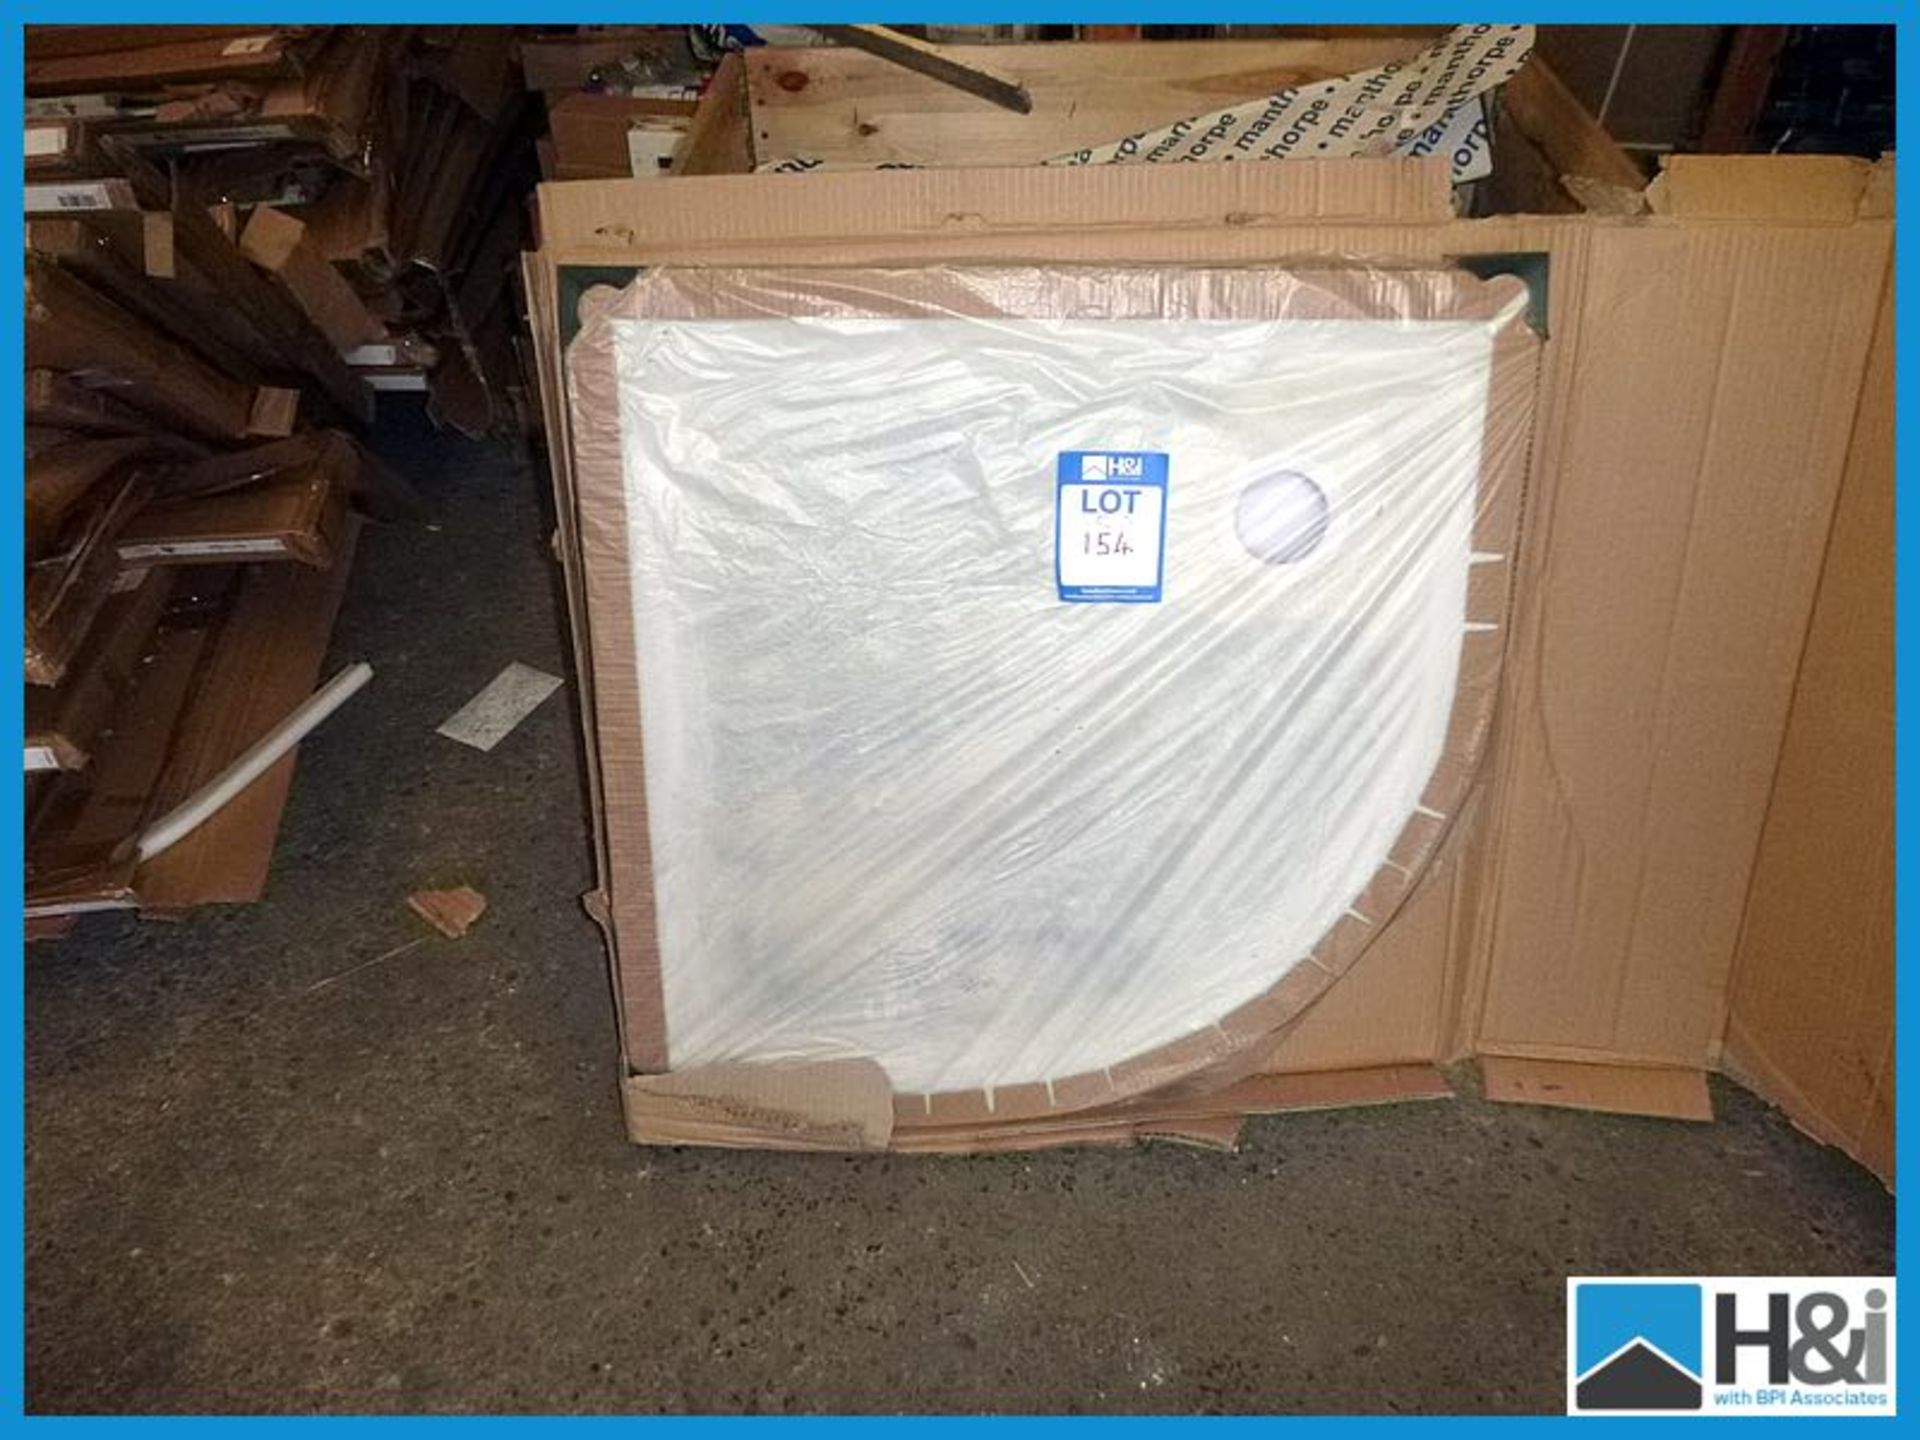 900mm quadrant shower trays, 40mm, unused and boxed Appraisal: Good Serial No: NA Location: H&I